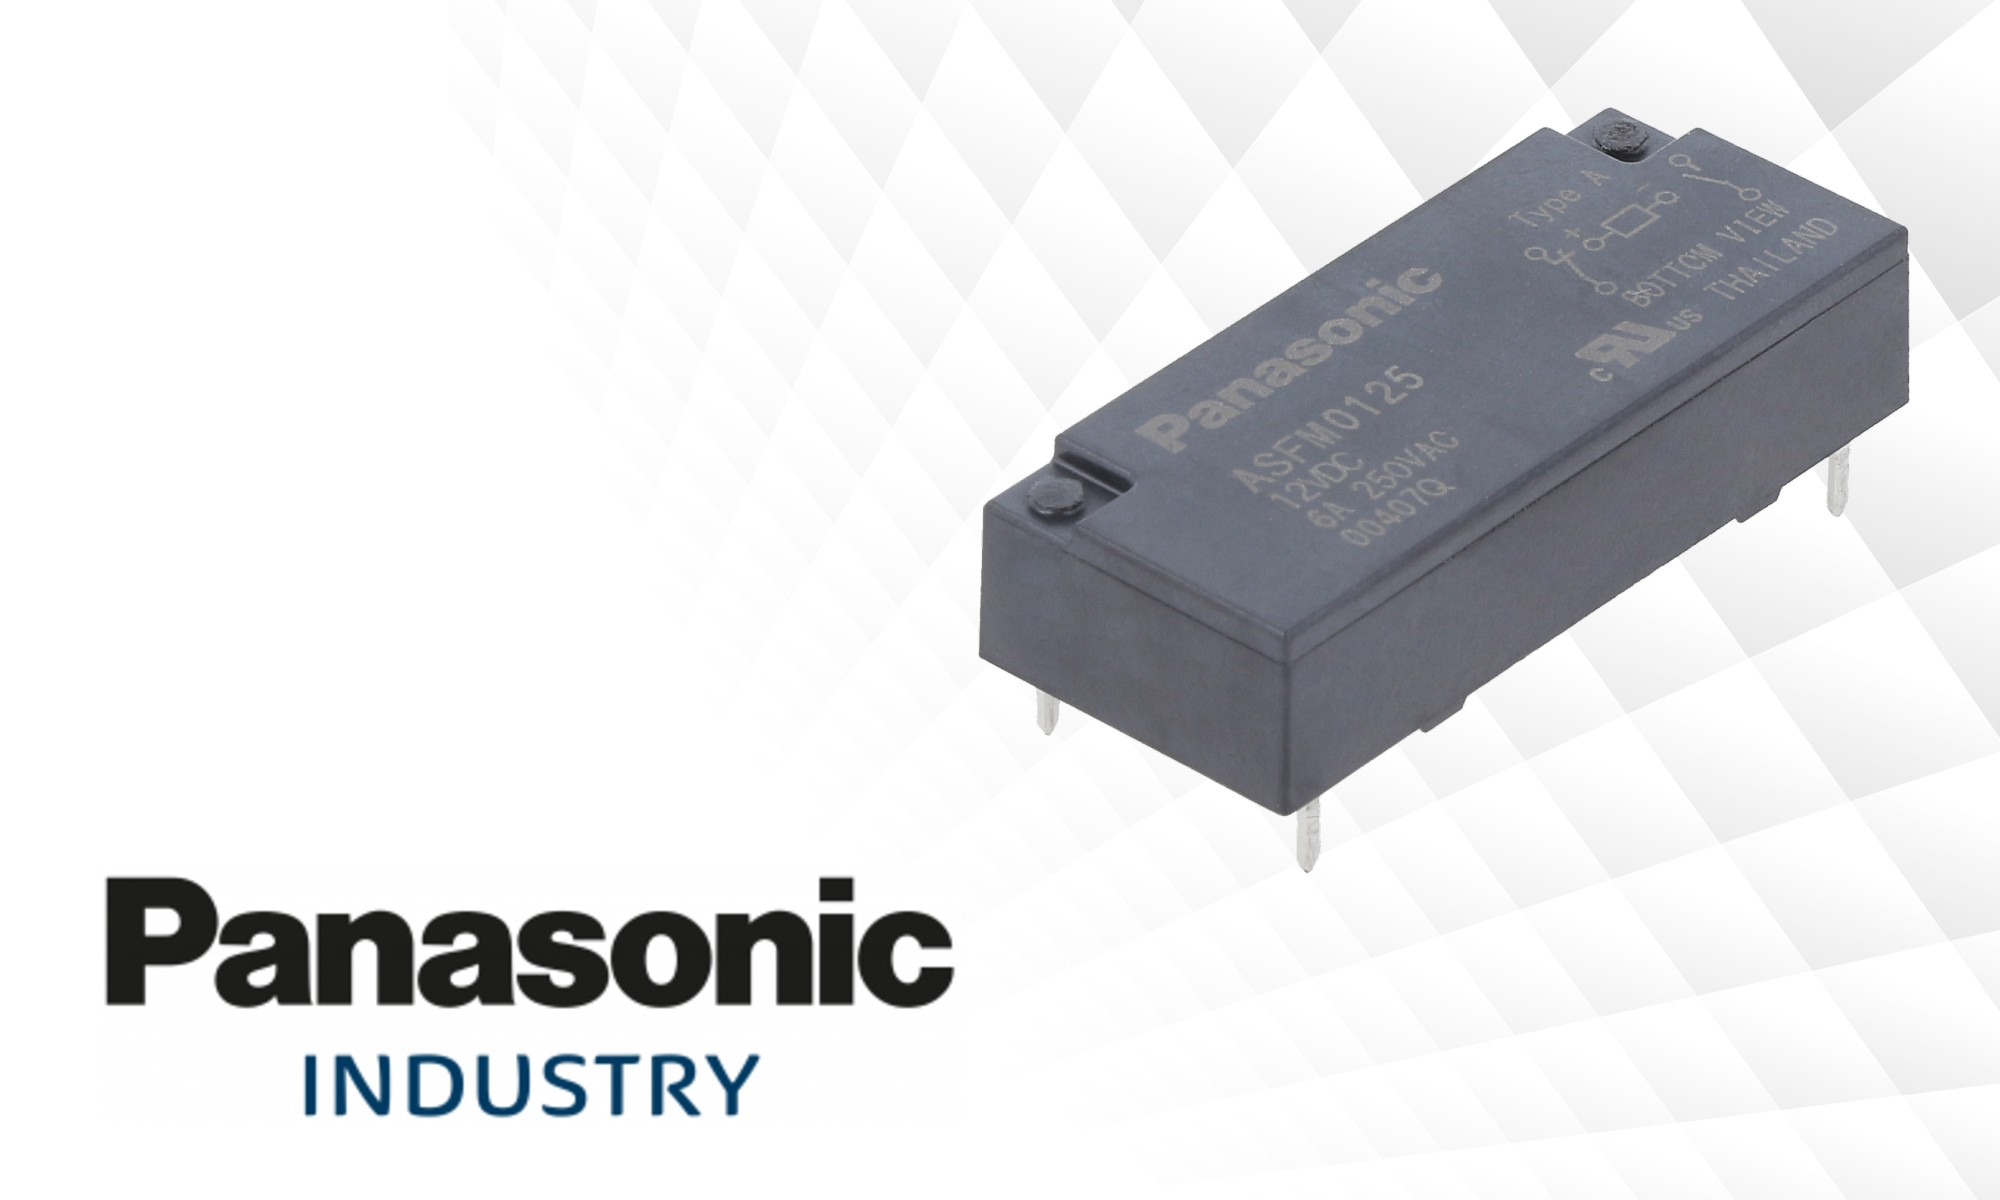 New series of safety relays from Panasonic